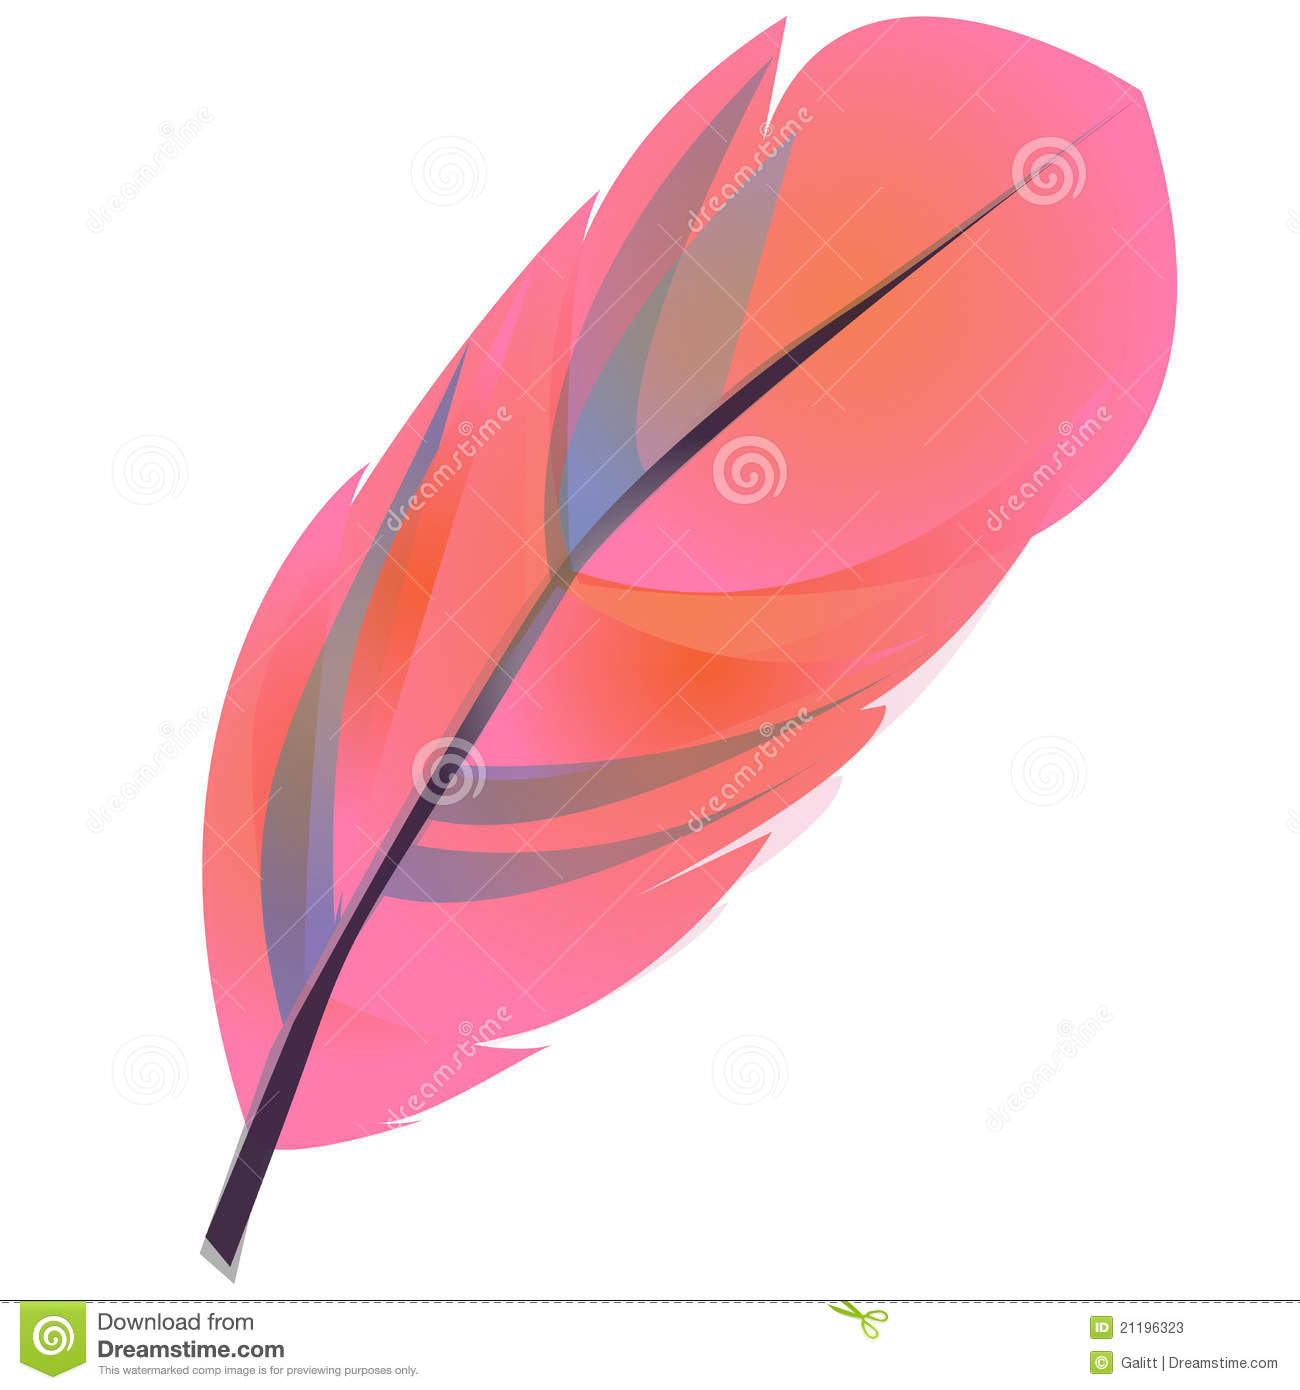 Feather Clipart Stock Photos   Image  21196323